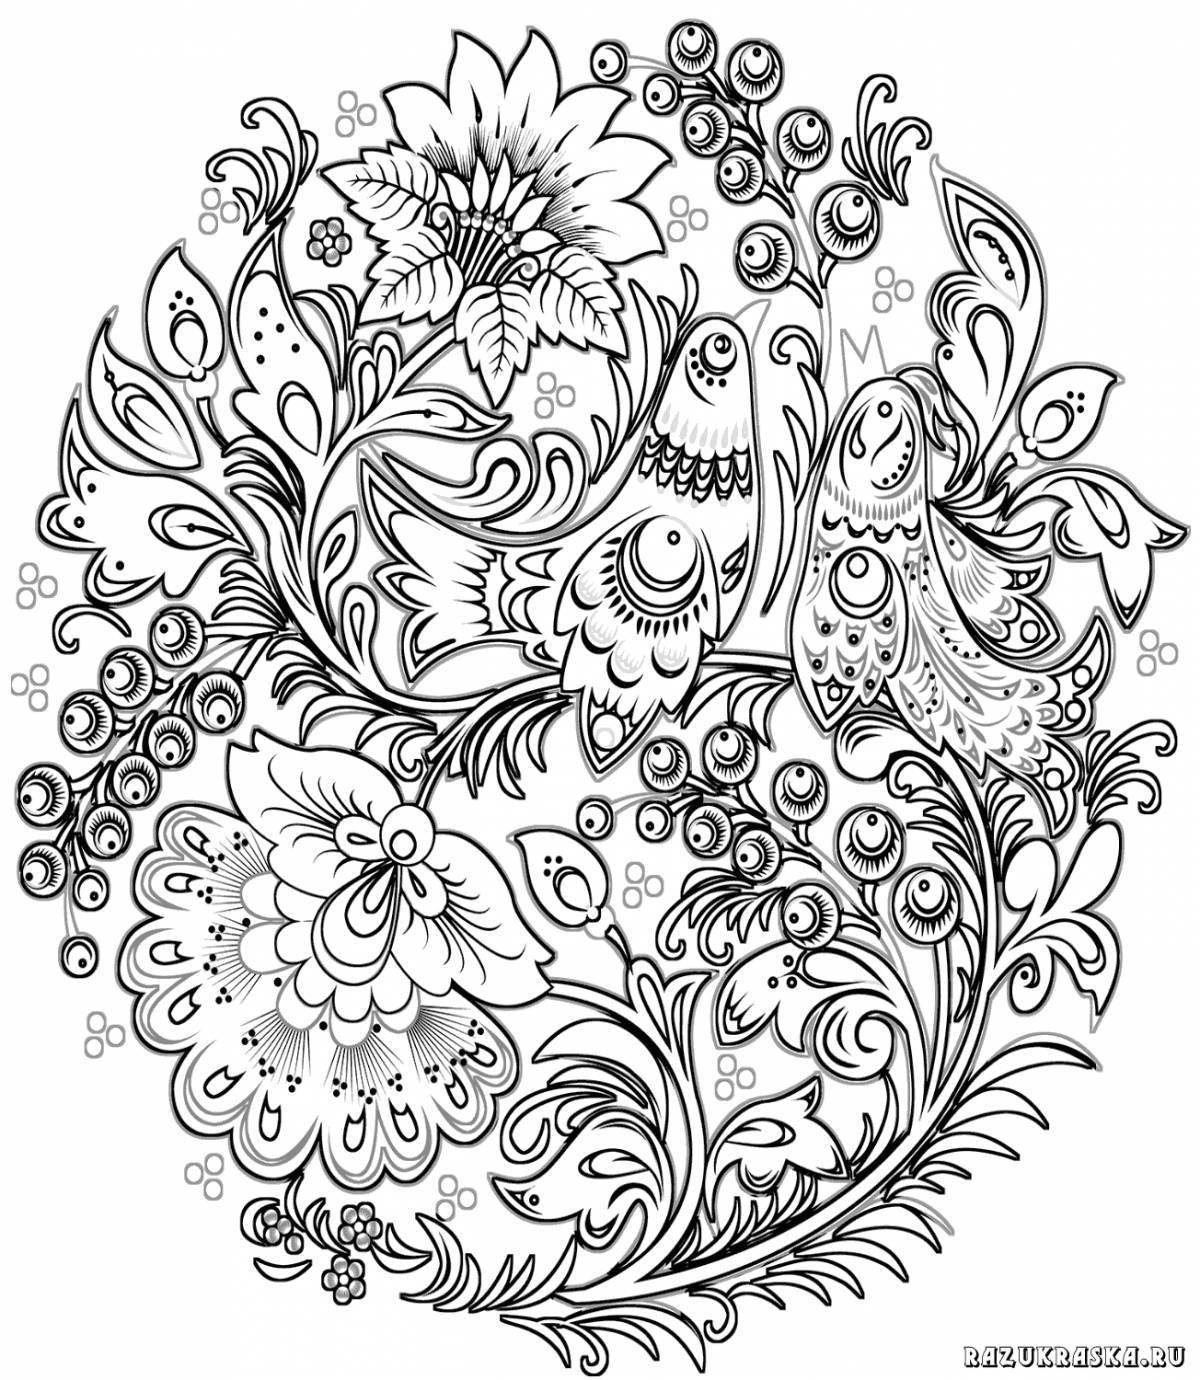 Coloring page gentle Russian pattern